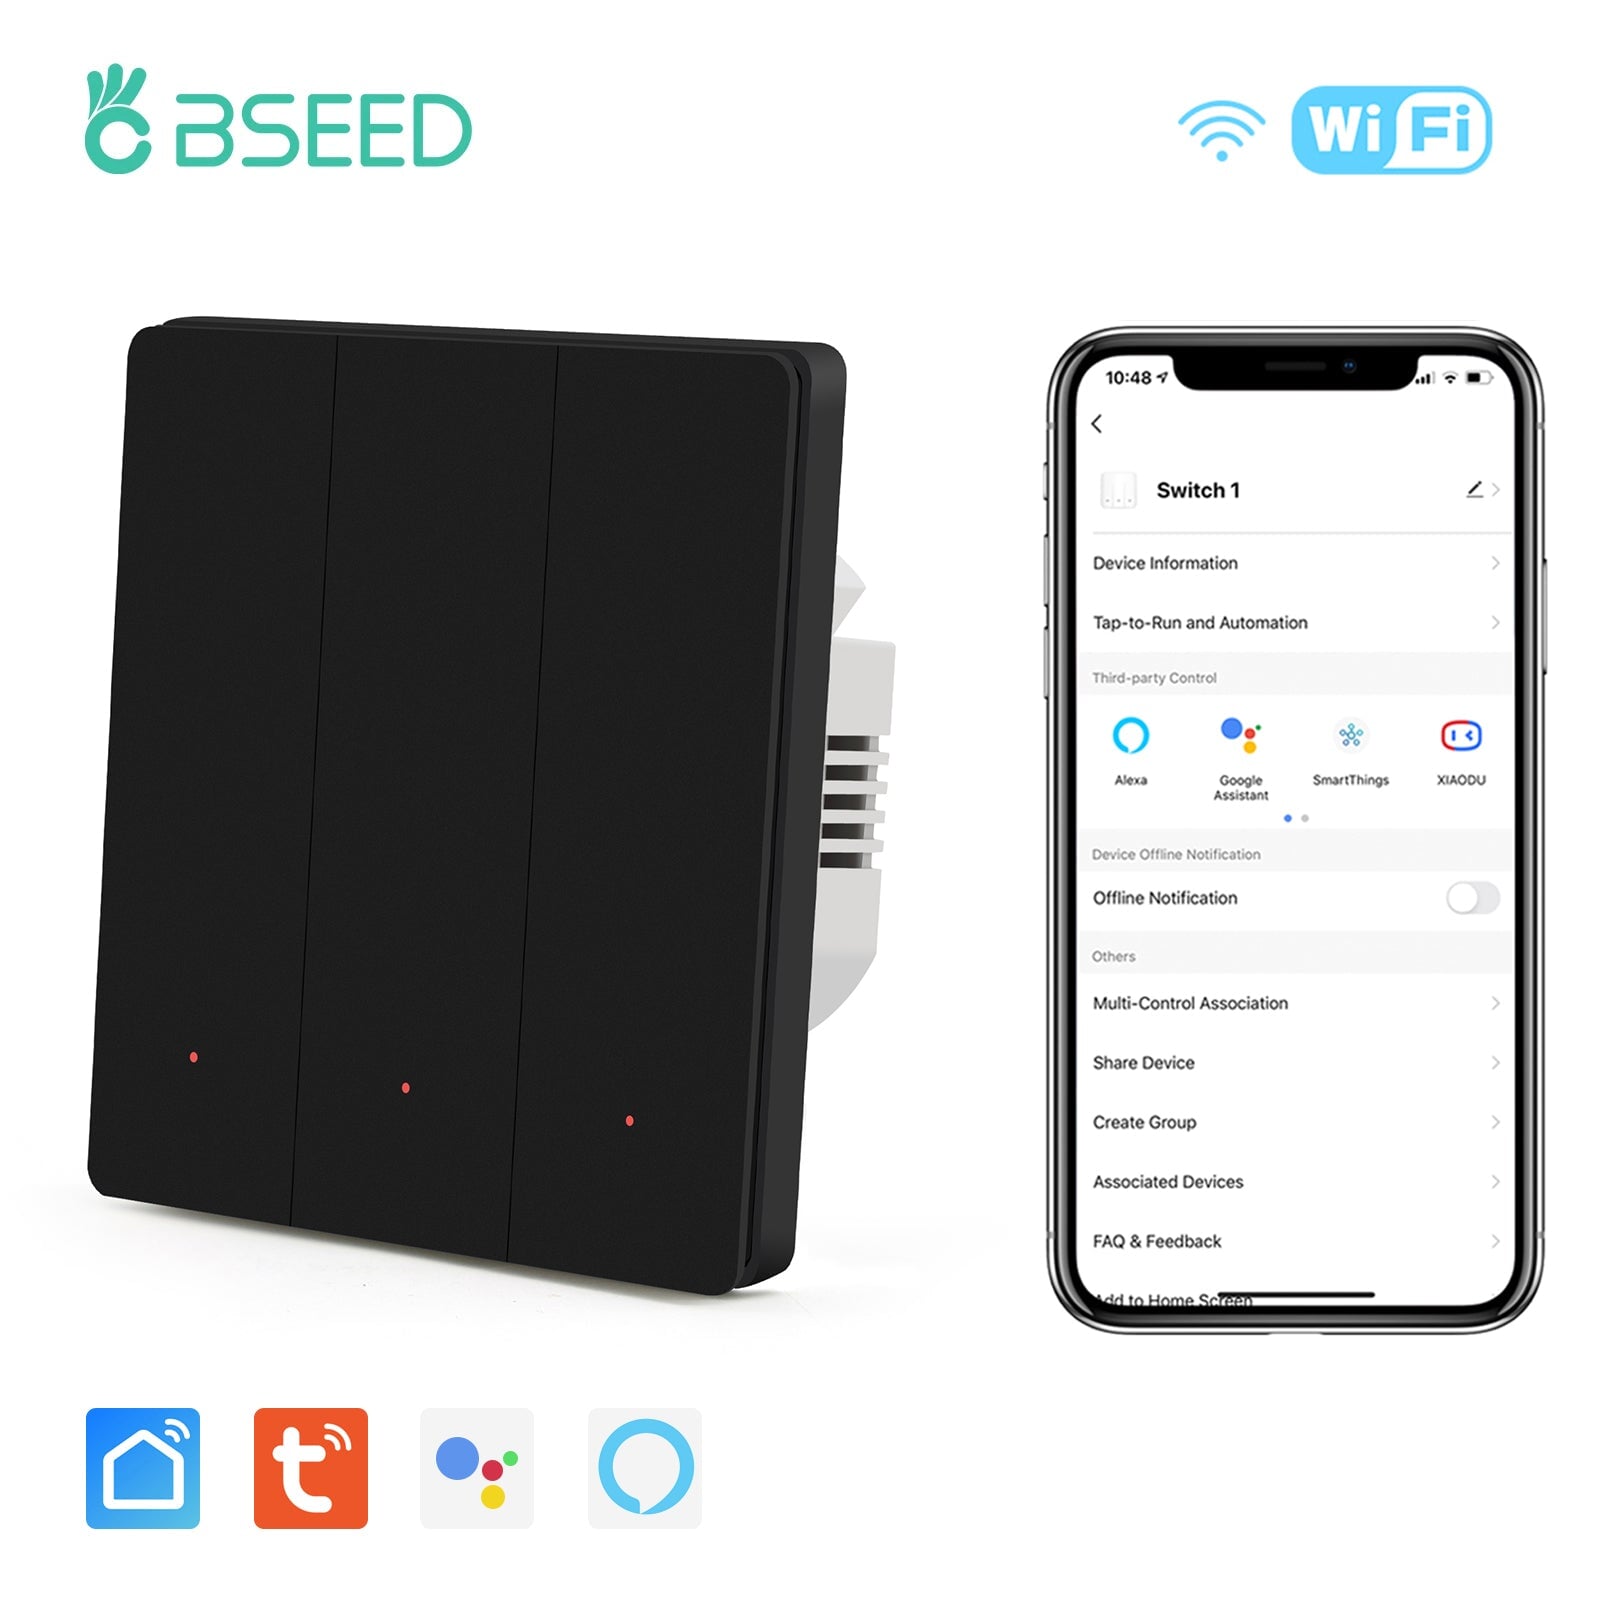 BSEED WiFi Automatic Rebound Smart Wall Light Switches Neutral Switch Bseedswitch Black 3gang 